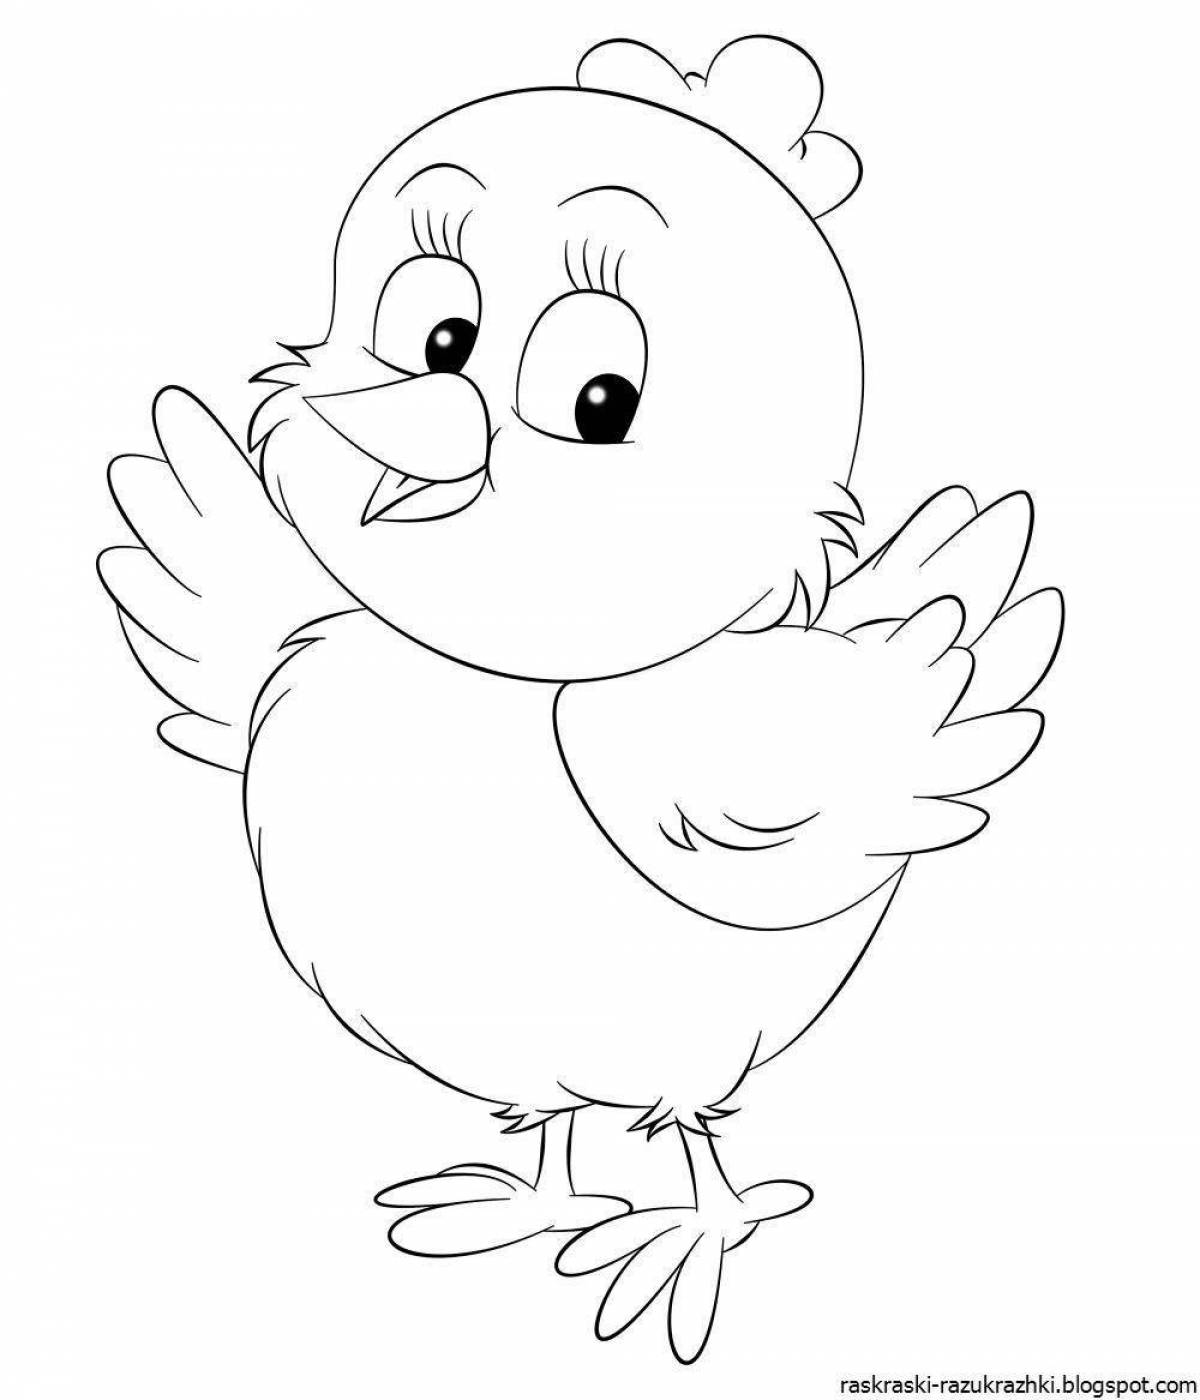 Rough Chicken Coloring Page for 3-4 year olds